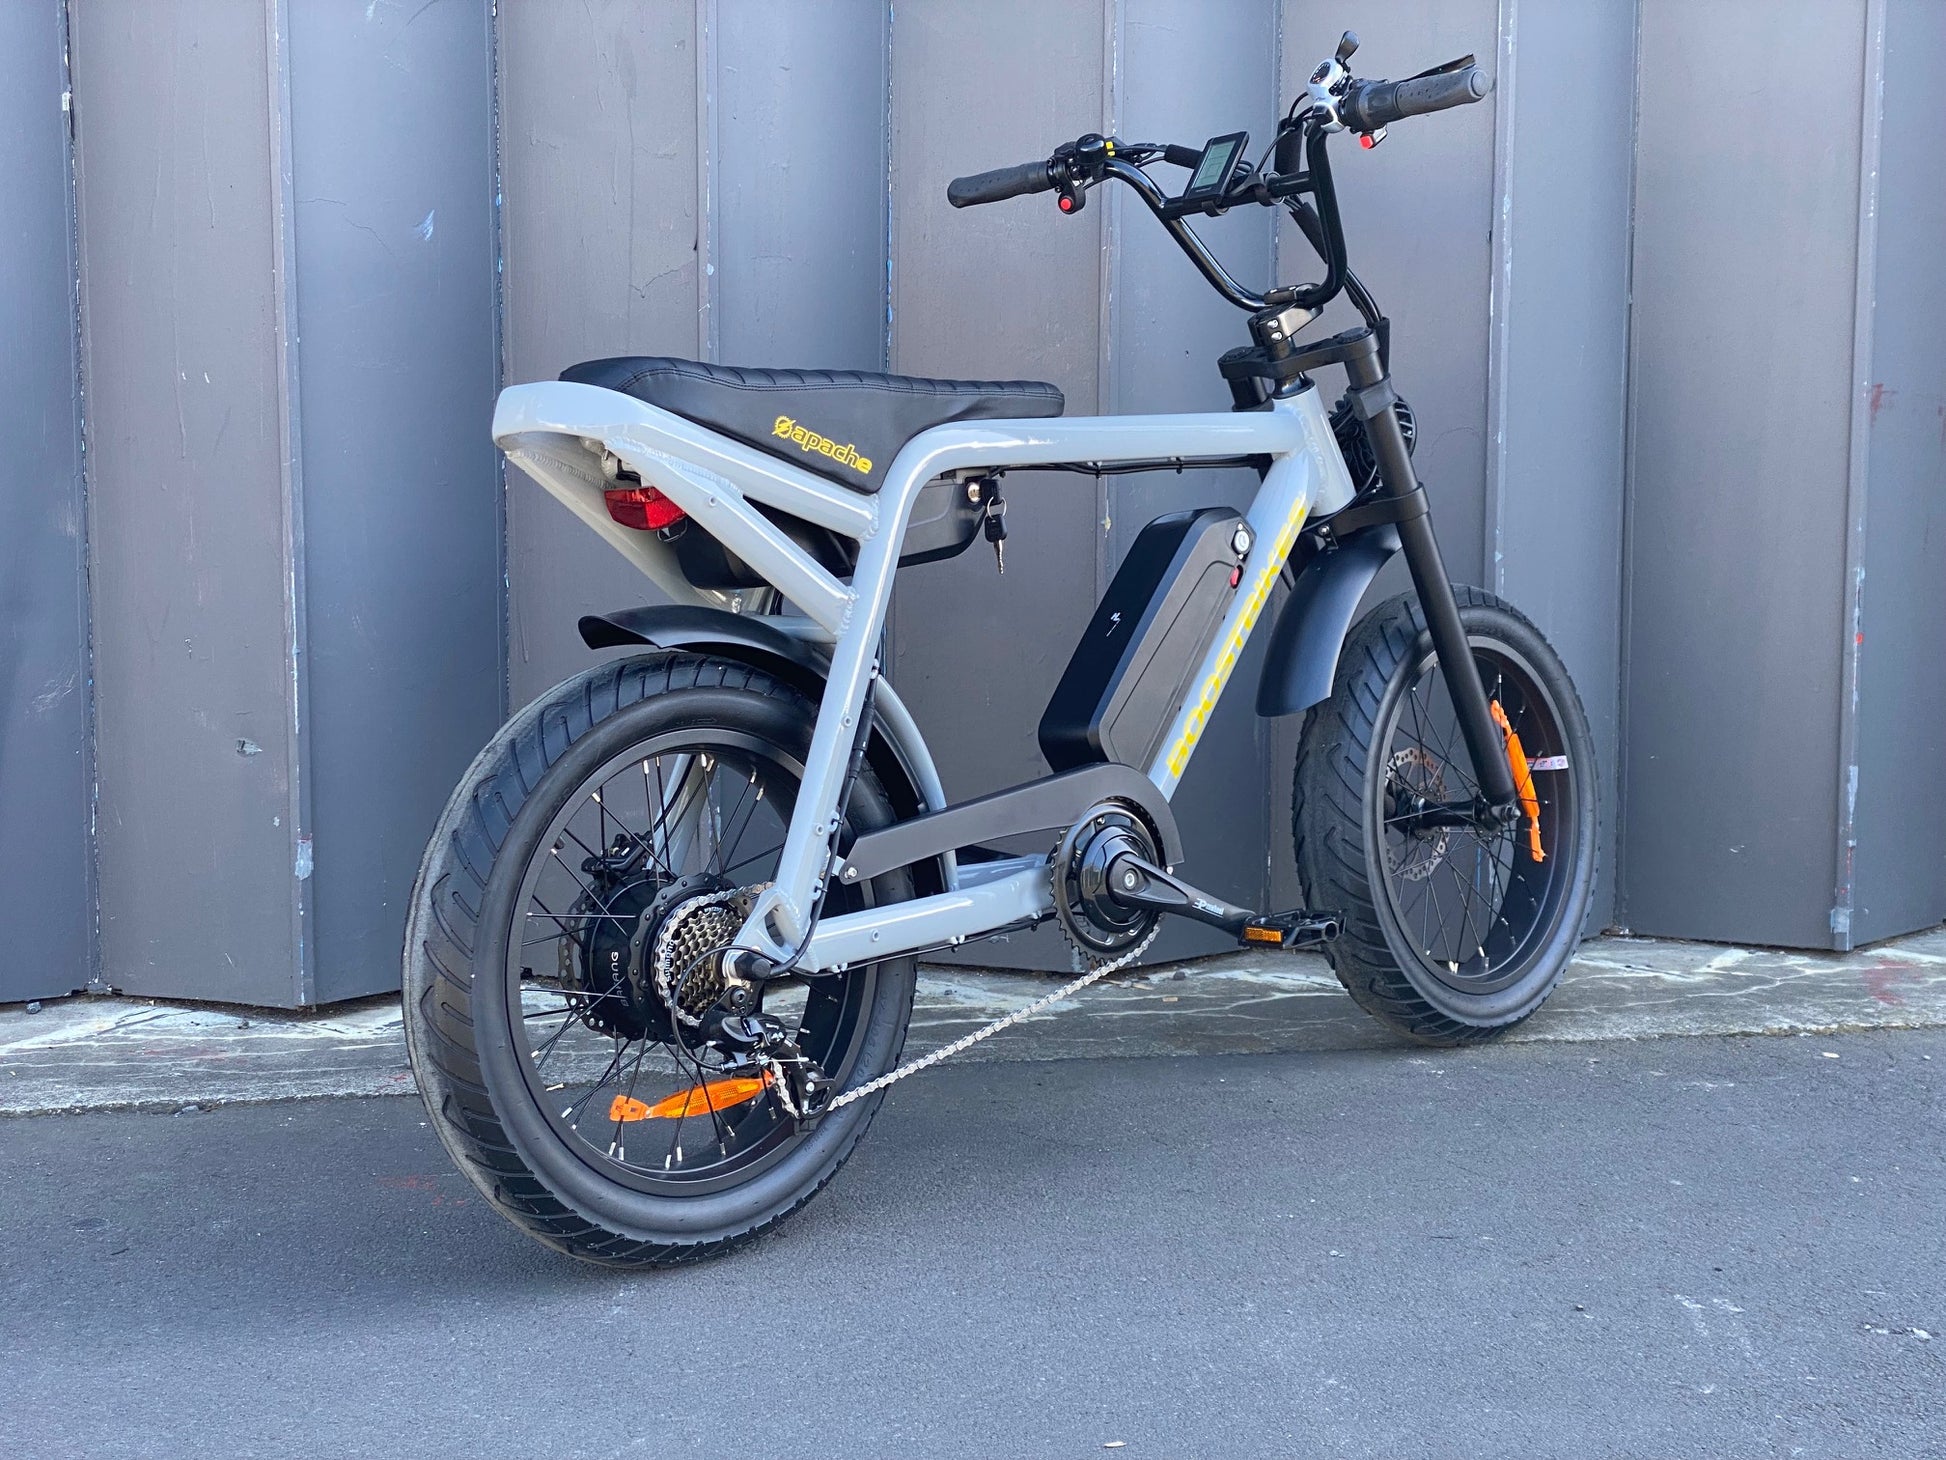  Apache Electric Bike, Modern yet retro 20" fat tyre ebike with performance and packed with features in true SUPER 73 style from Boostbikes.